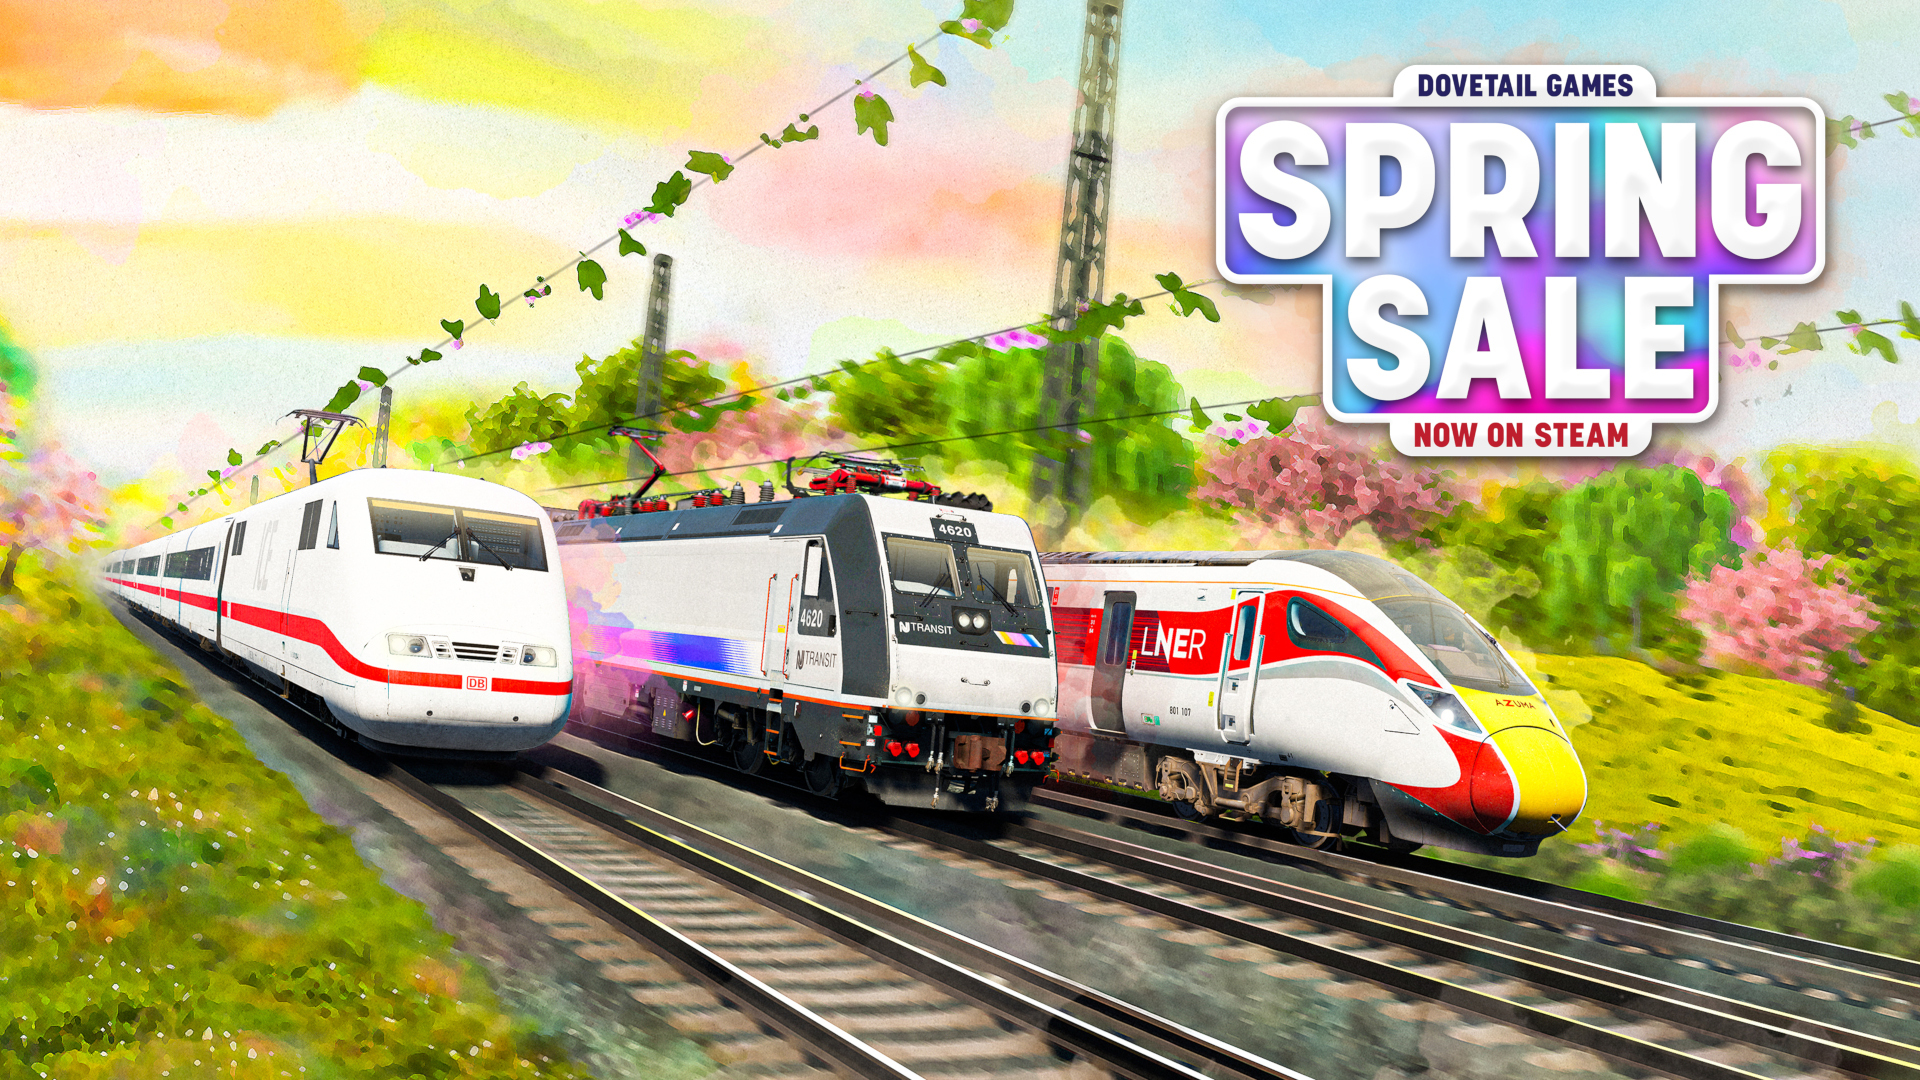 Steam Spring Sale Now On!